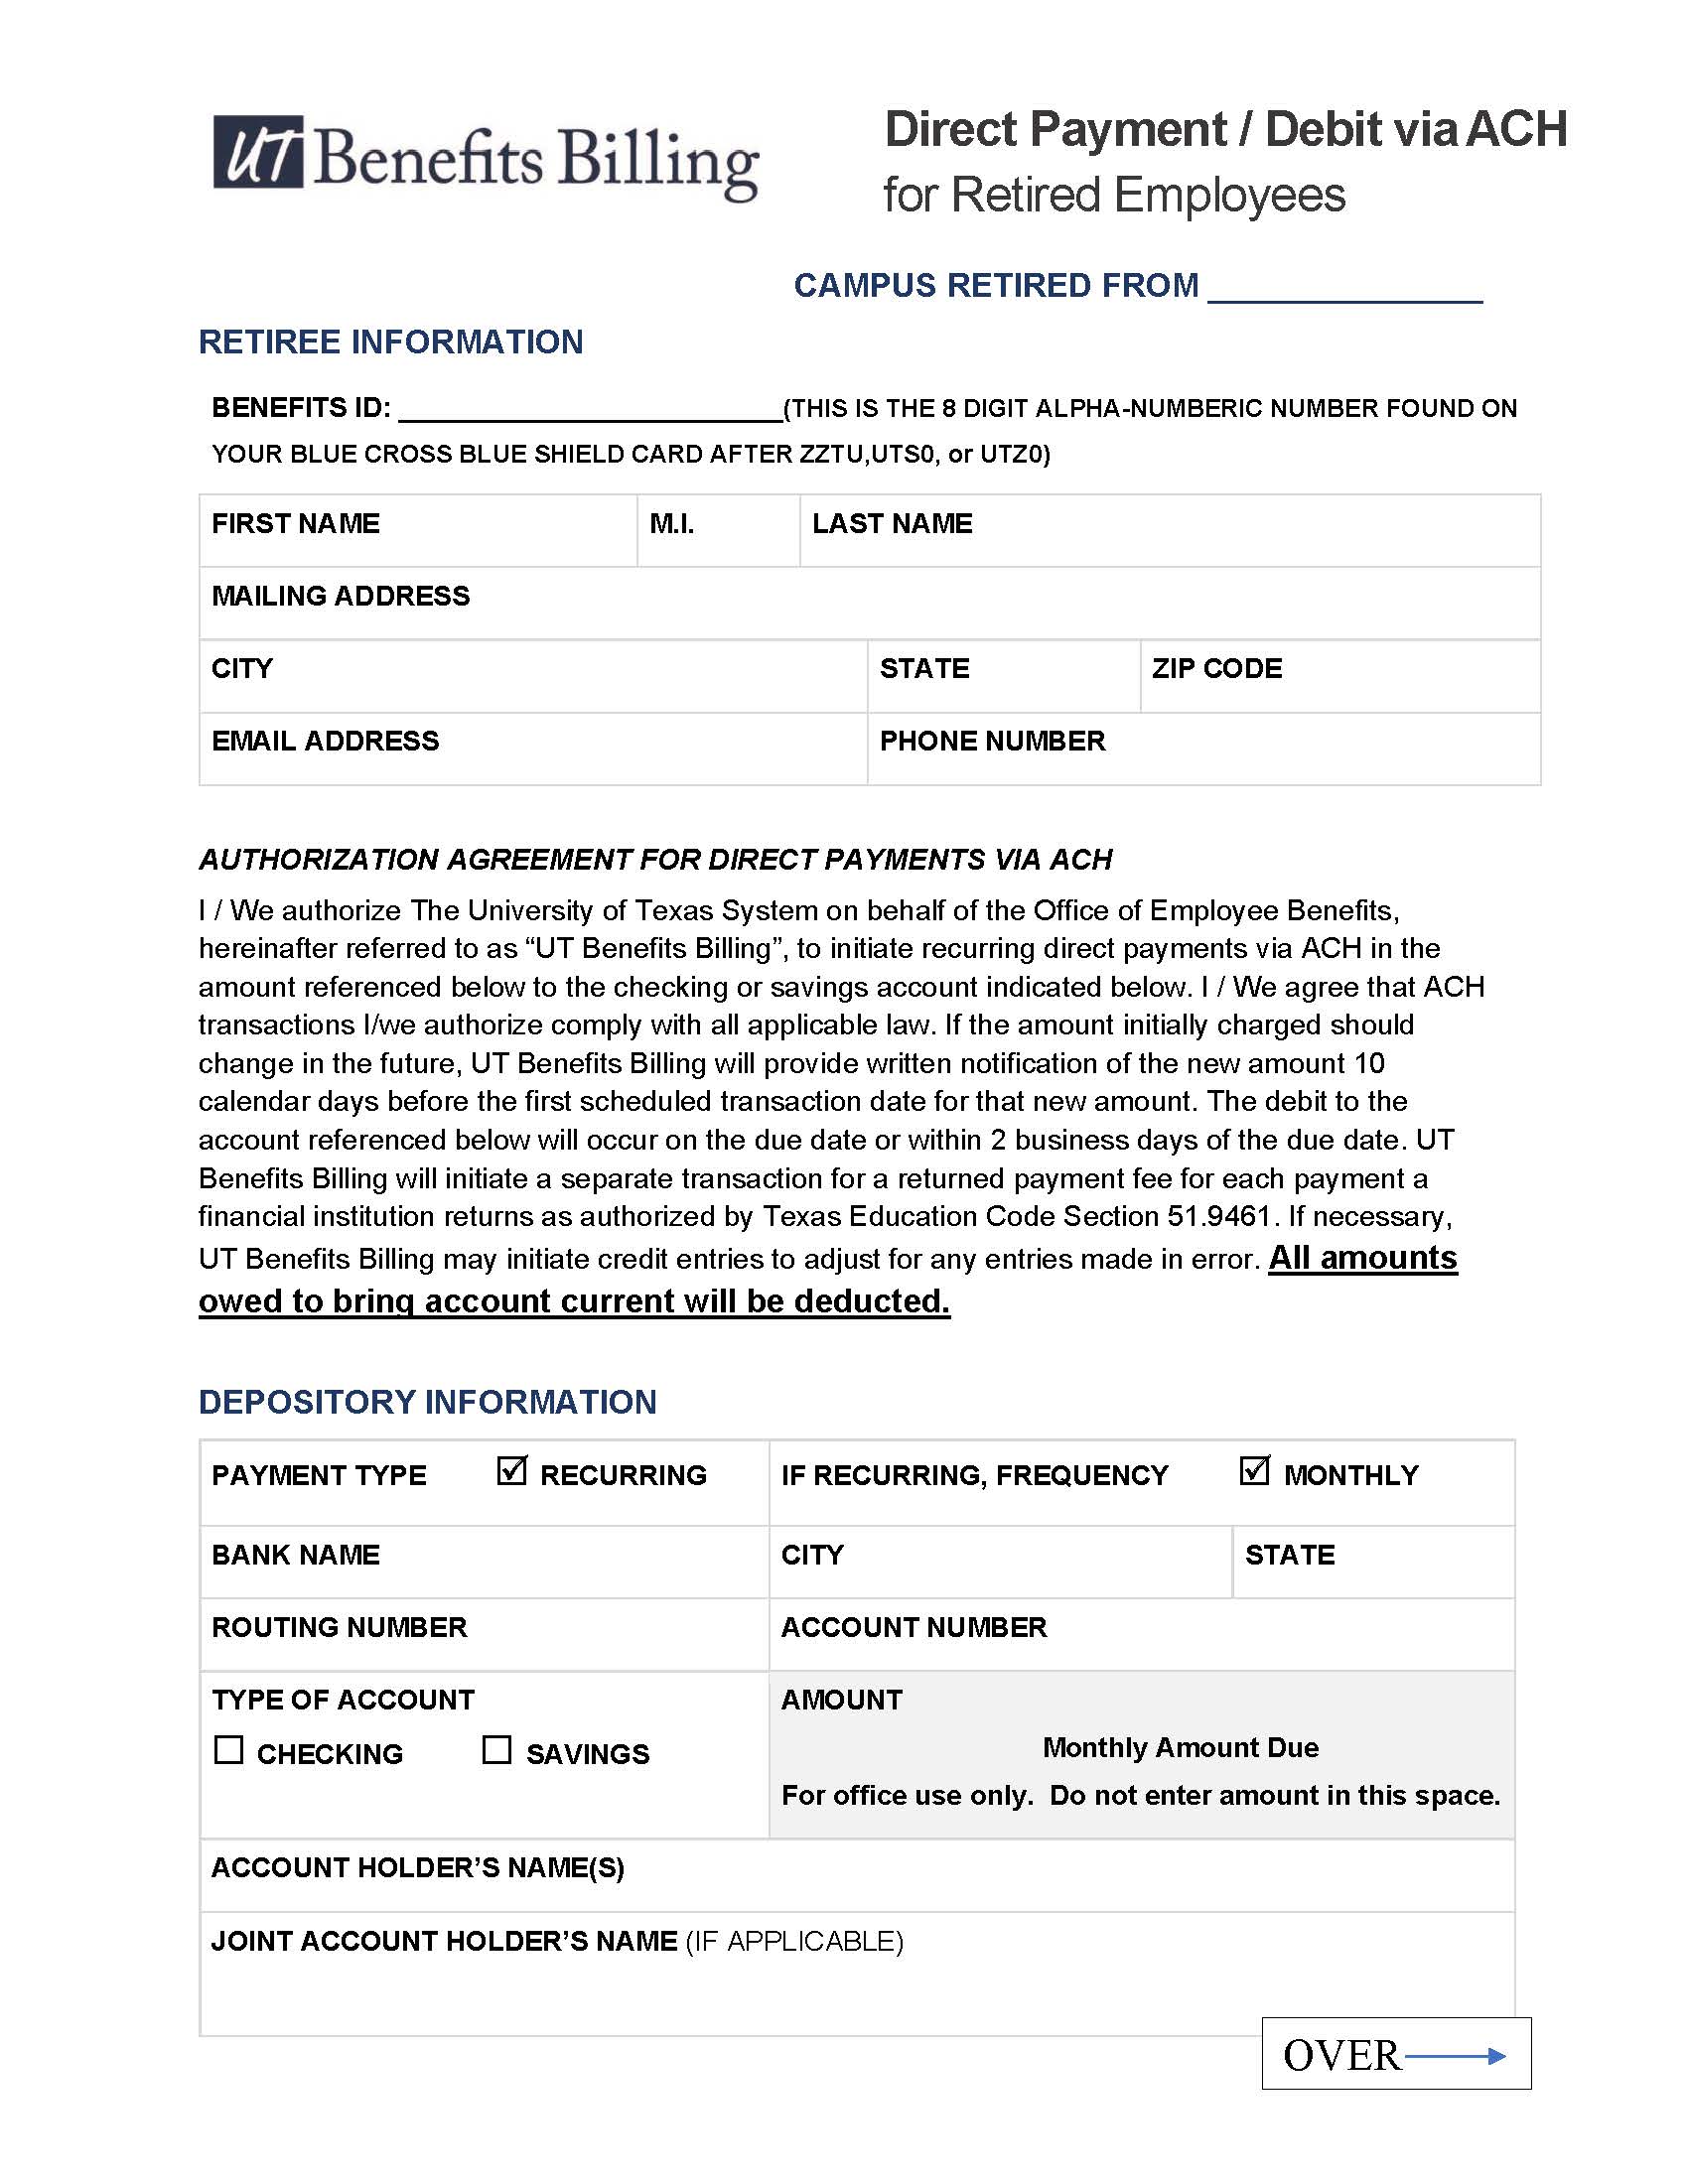 COBRA Direct Payment form cover page